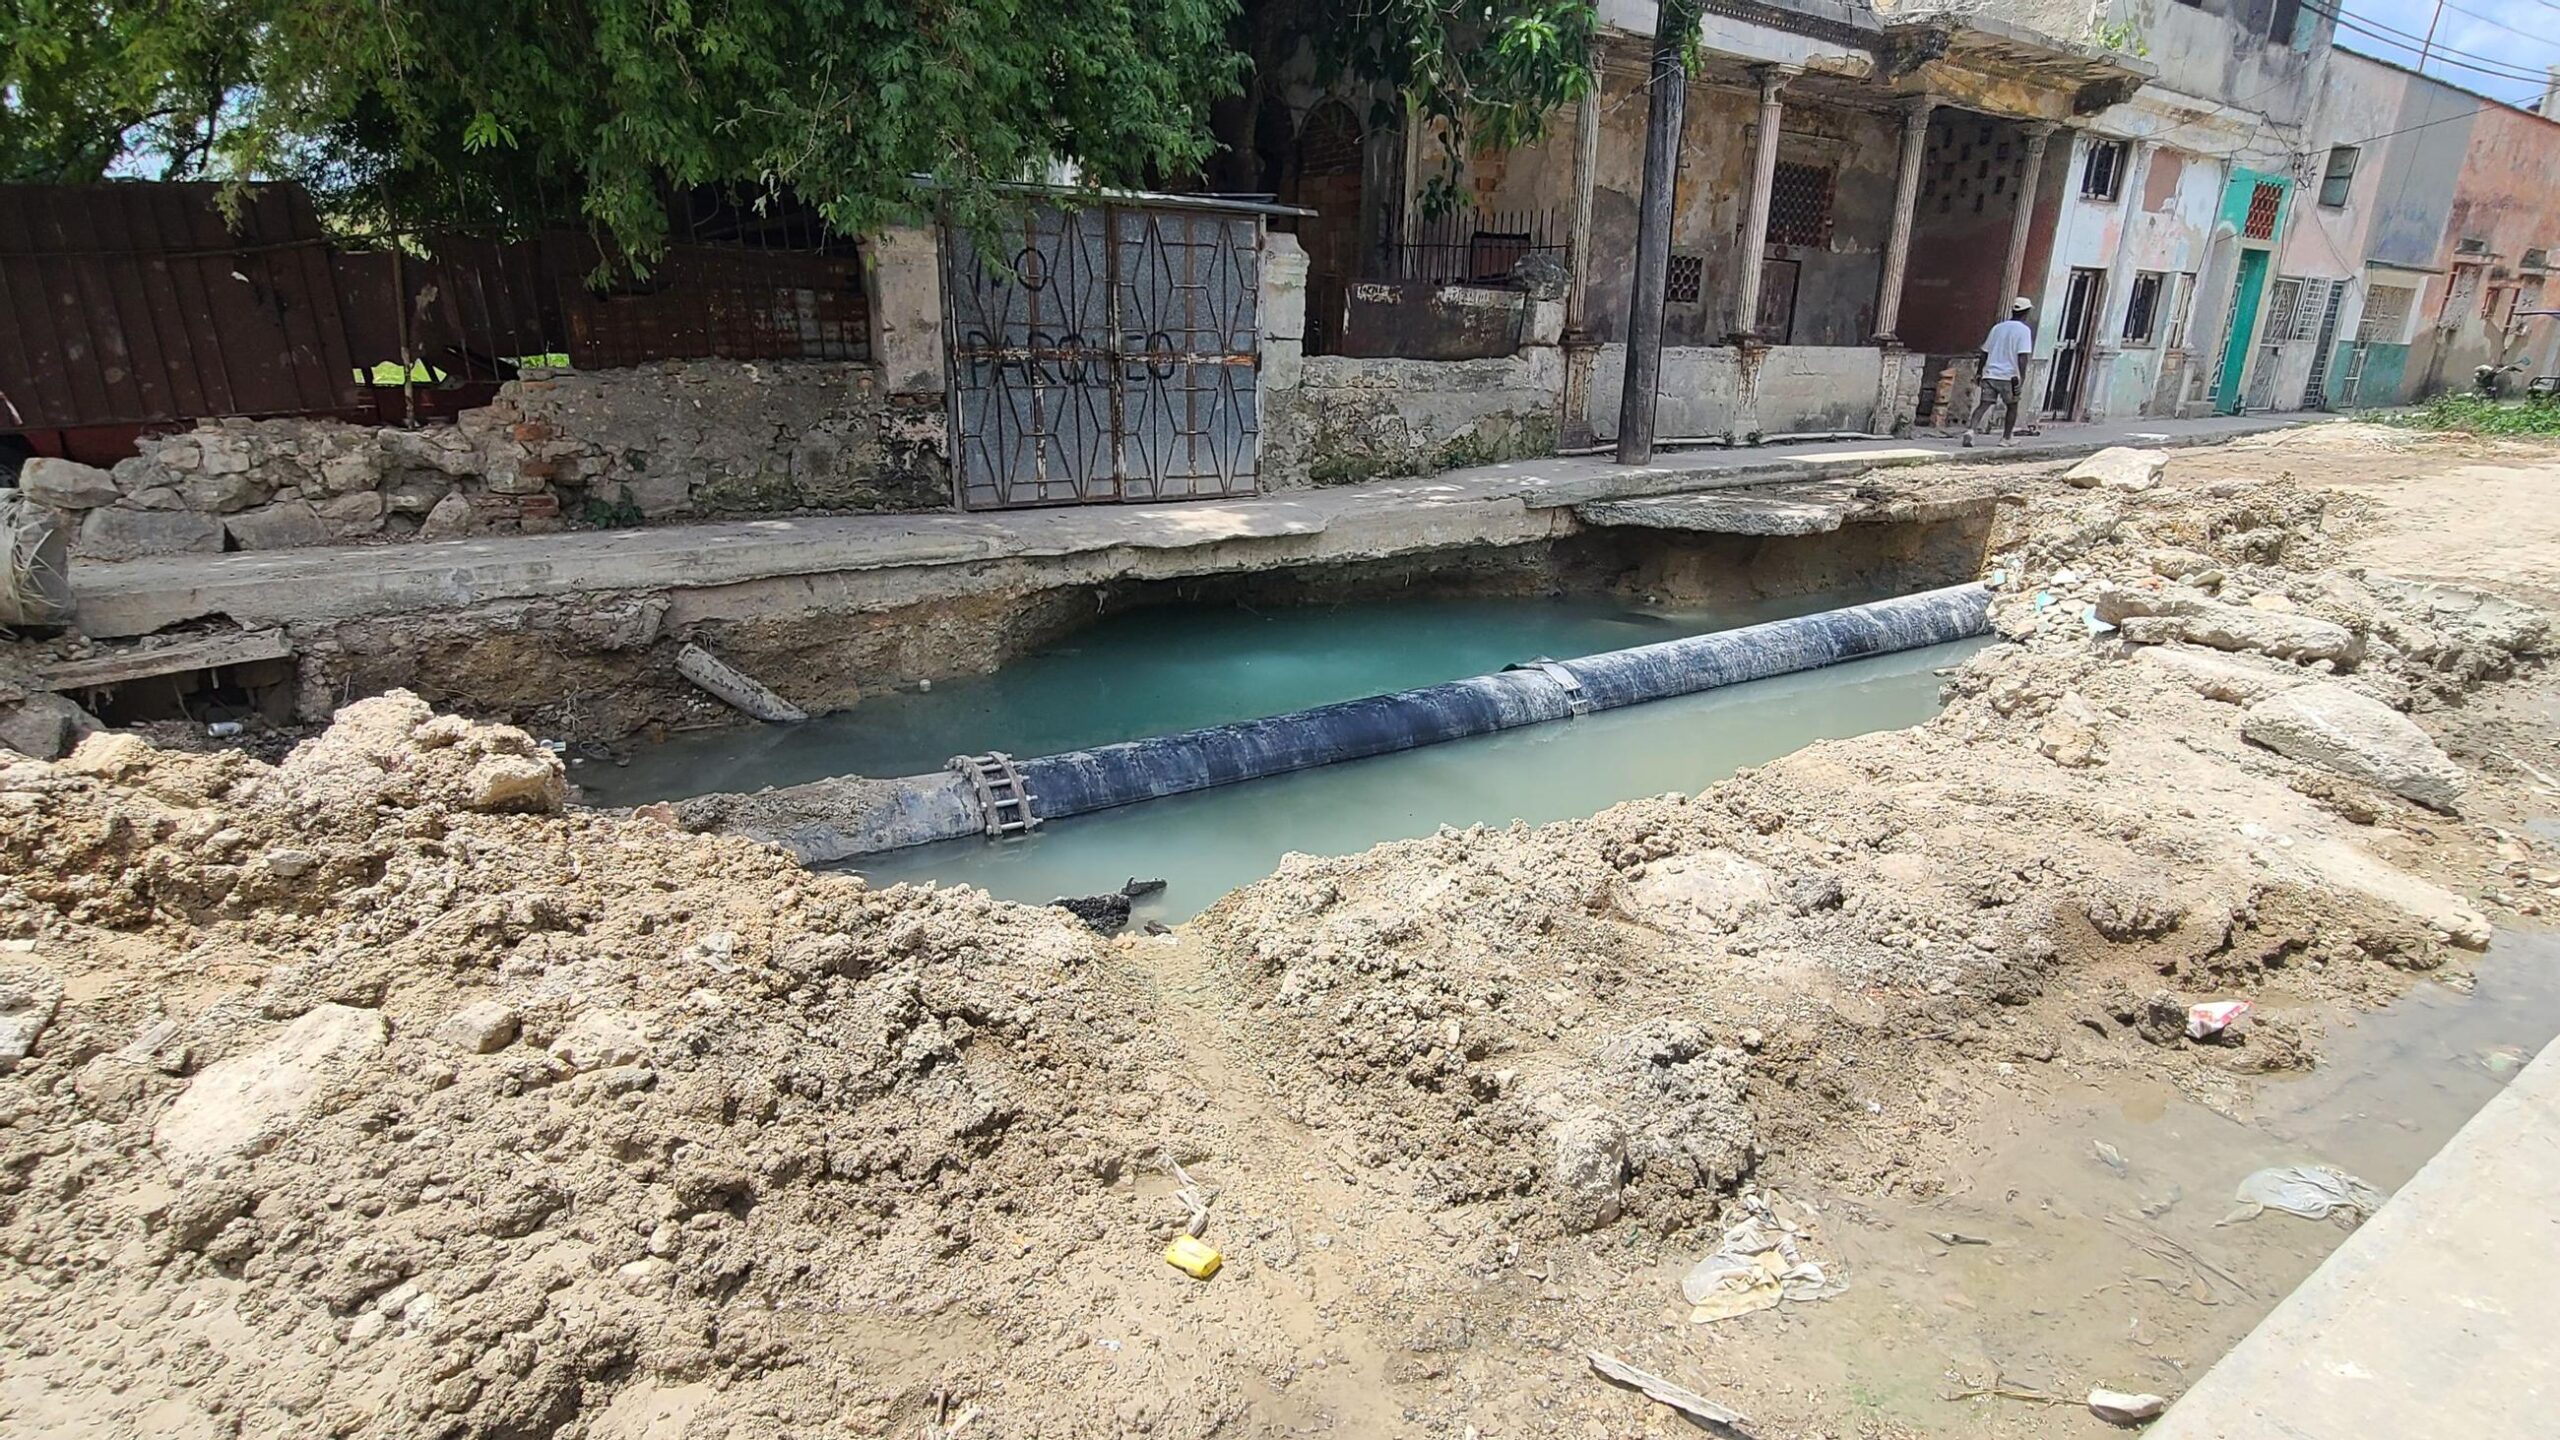 the-‘swimming-pool’-pothole-in-havana-where-children-bathe-has-been-open-for-several-years